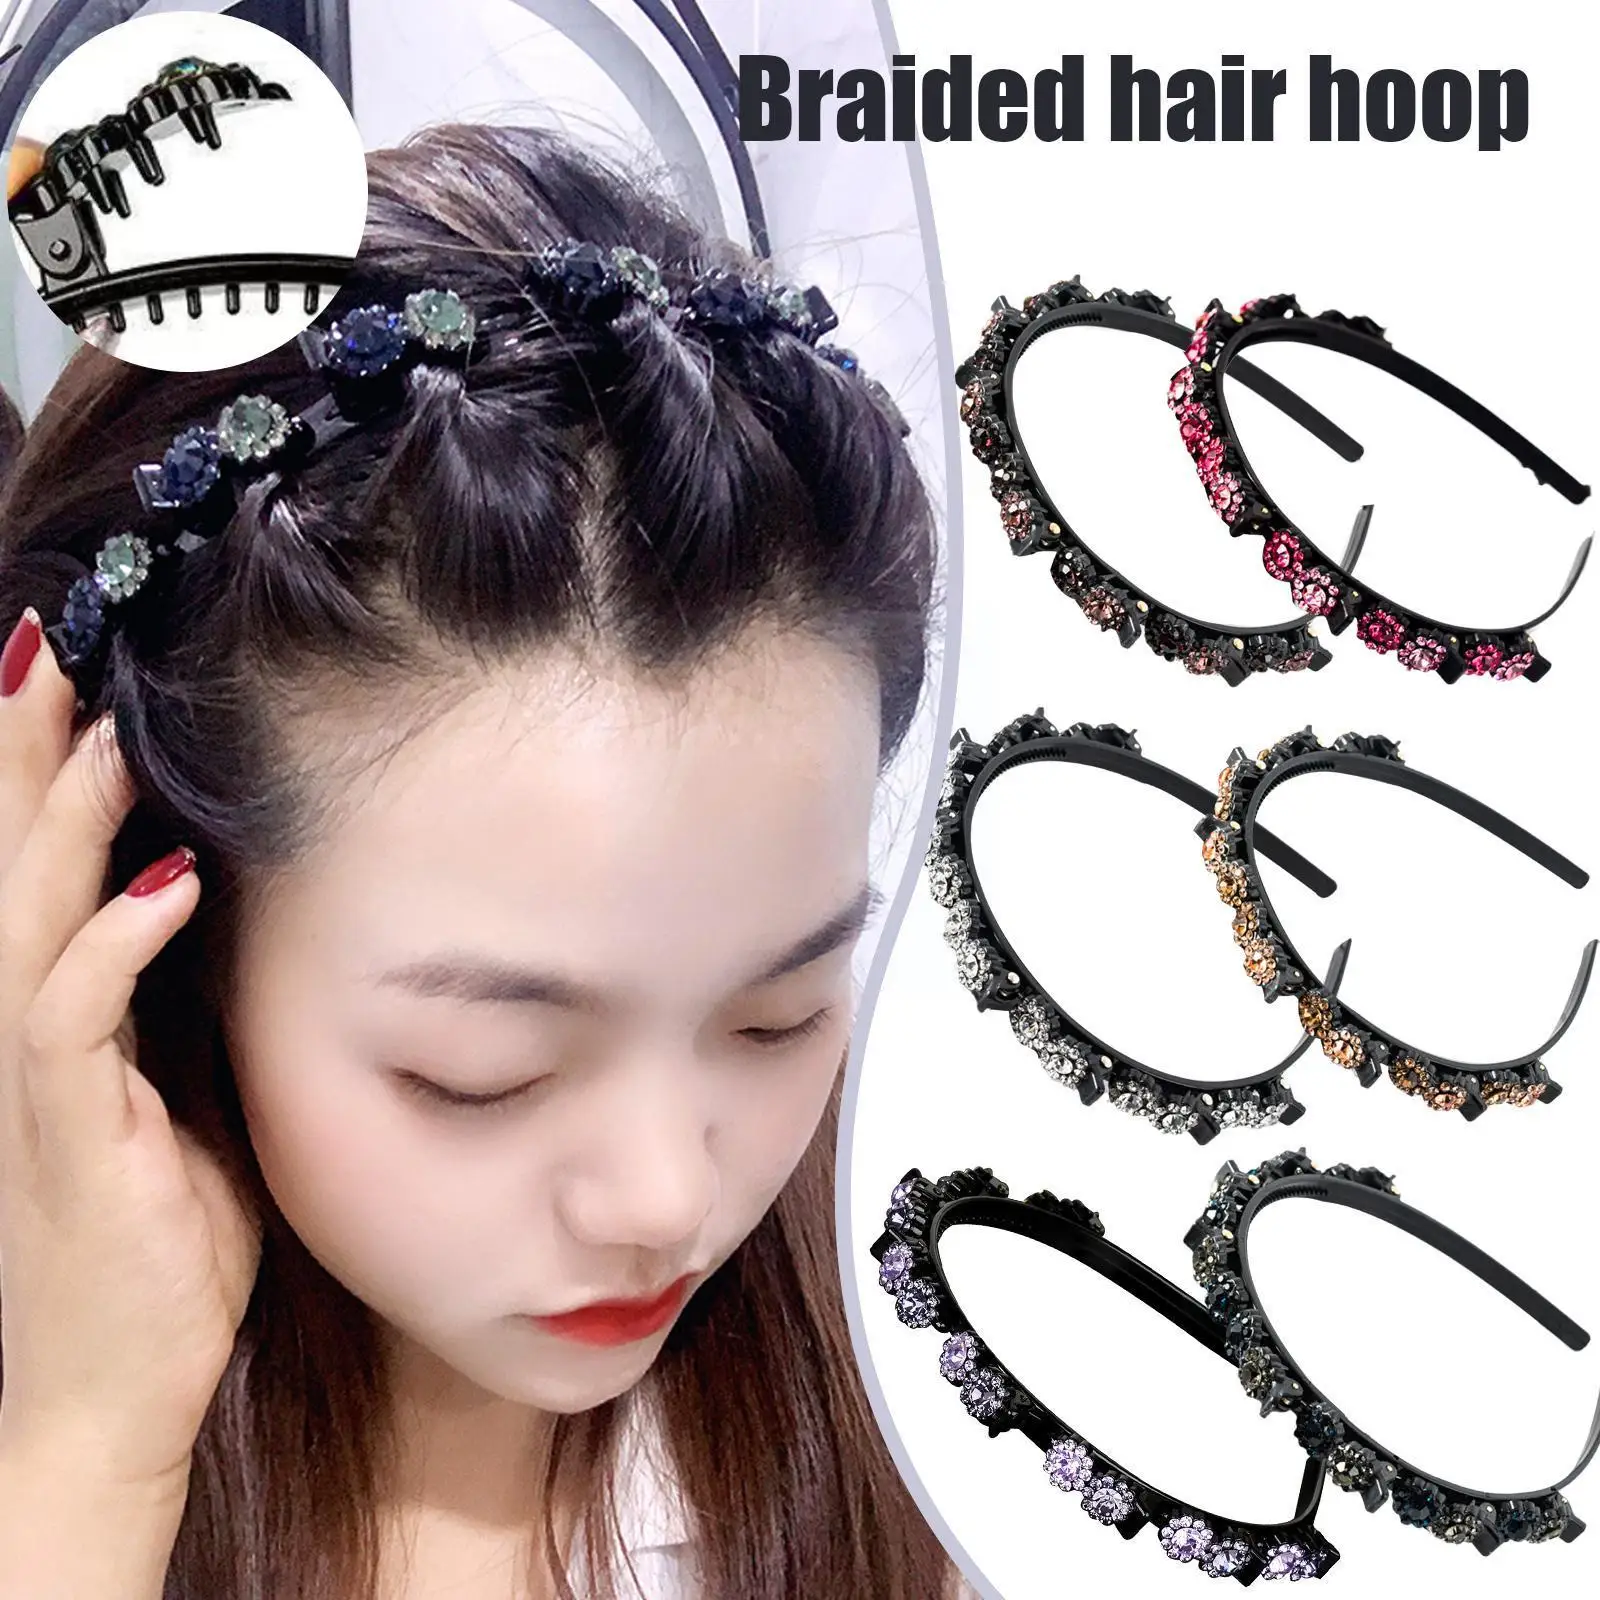 

Woman Double Layers Hairband With Clips Twist Clip Turban Braid Hairstyle Headband Lady Hollow Hair Bezel Accessories X7C6